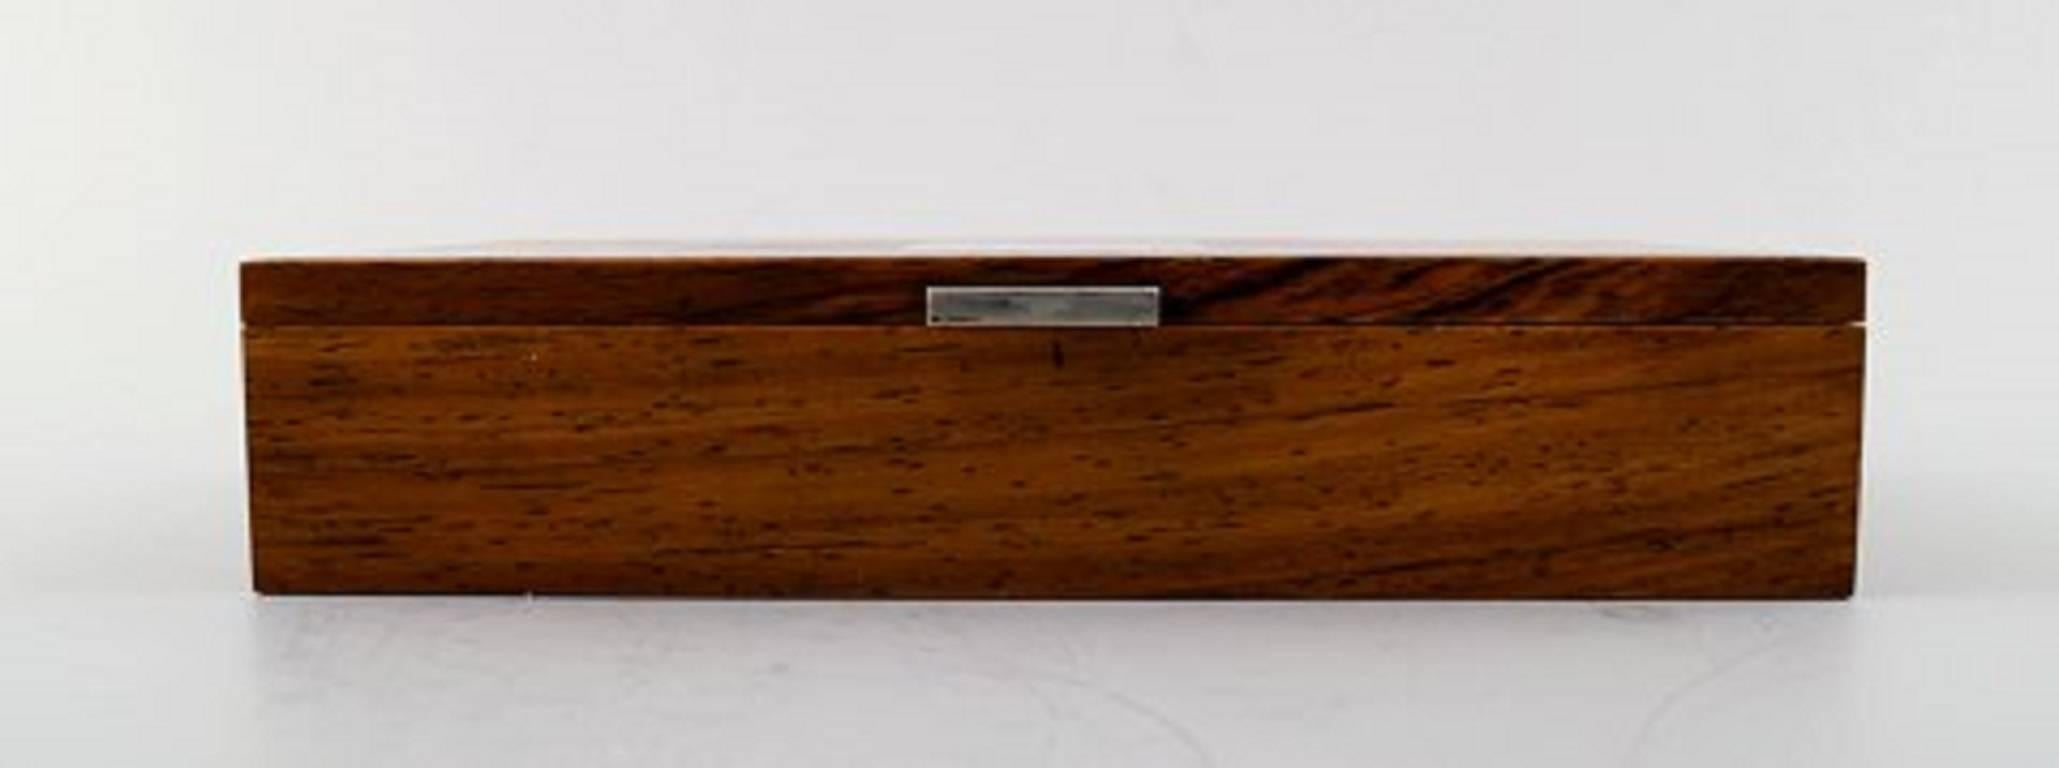 Hans Hansen: Casket or box in rosewood inlaid with silver.
Marked Hans Hansen.
Mid-20th century. Danish design.
Measures: 18 cm. x 11 cm. x 3.5 cm.
In perfect condition.